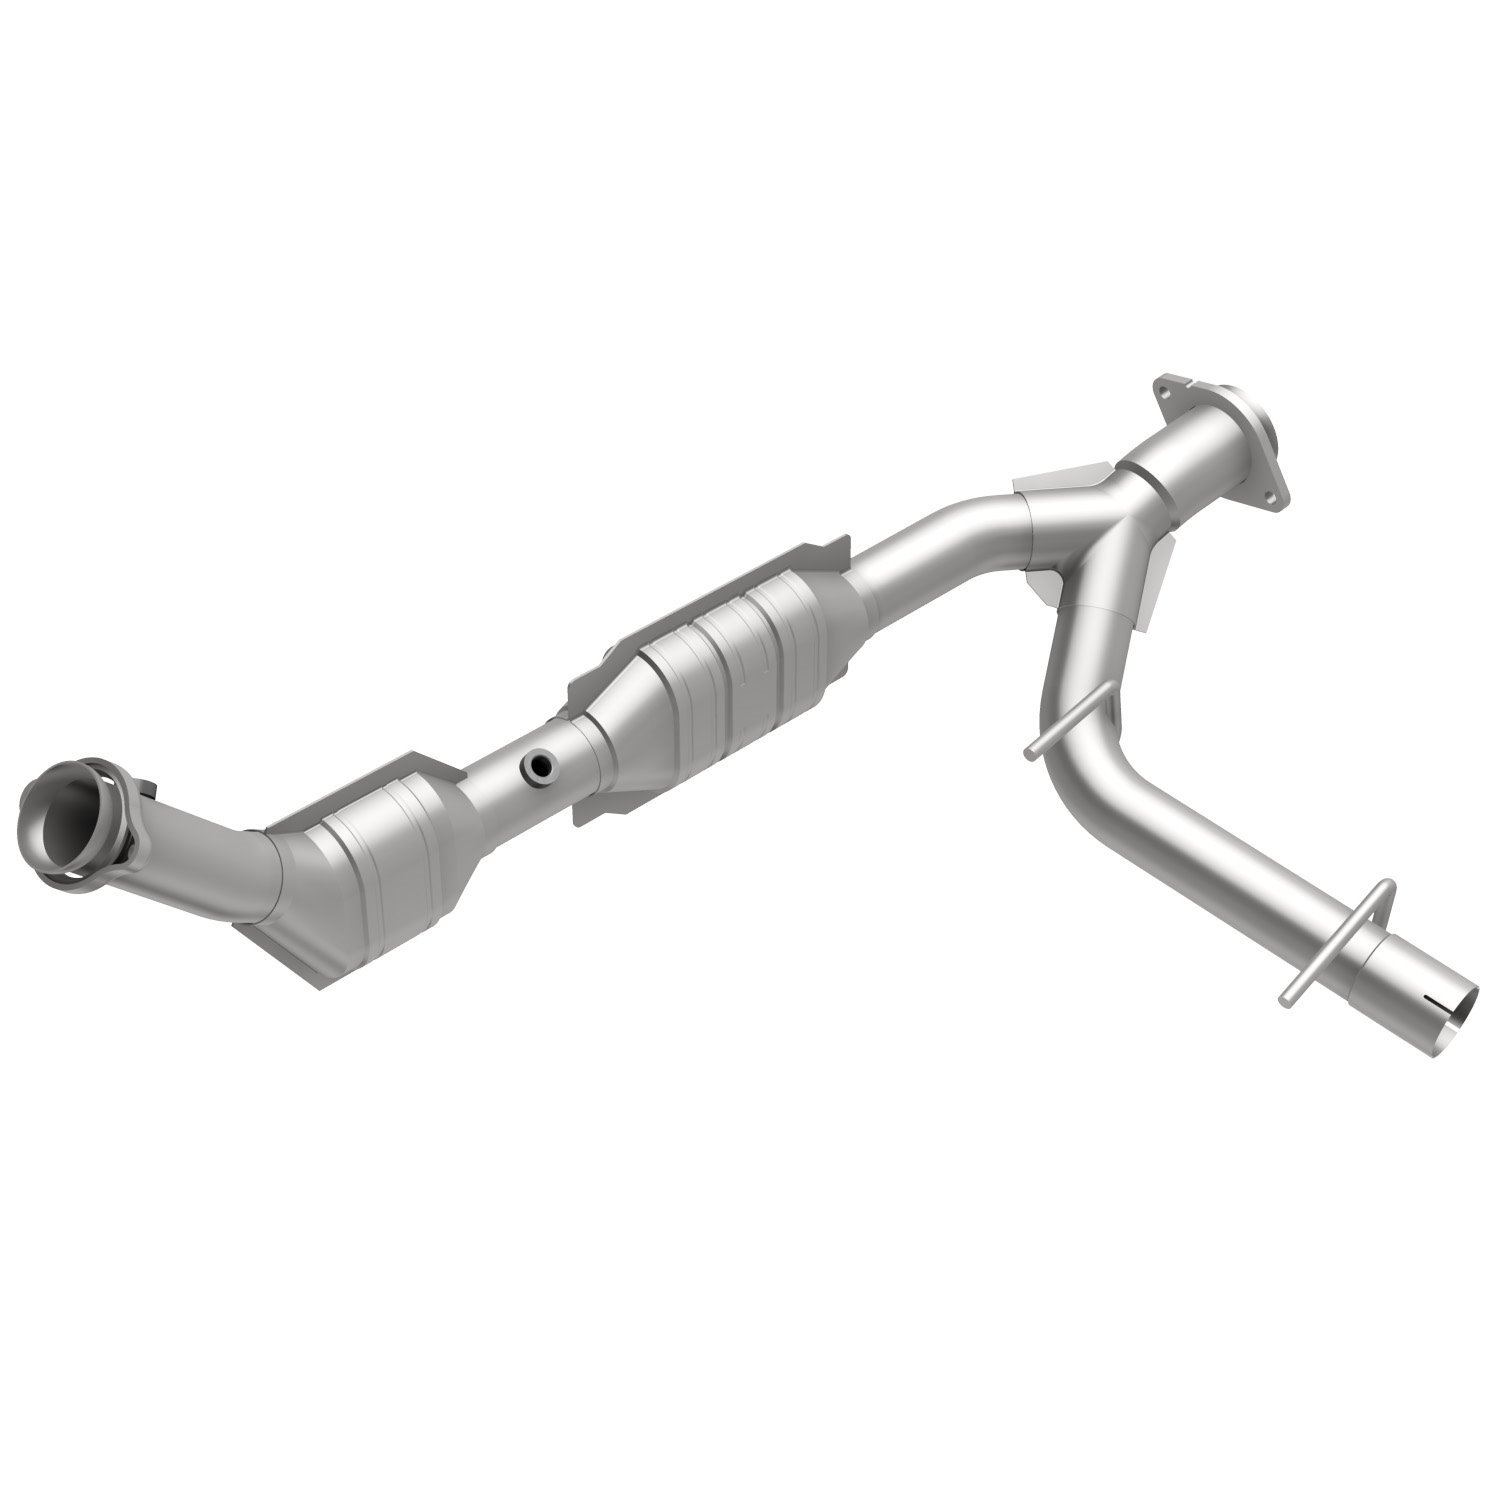 2003-2004 Ford Expedition HM Grade Federal / EPA Compliant Direct-Fit Catalytic Converter